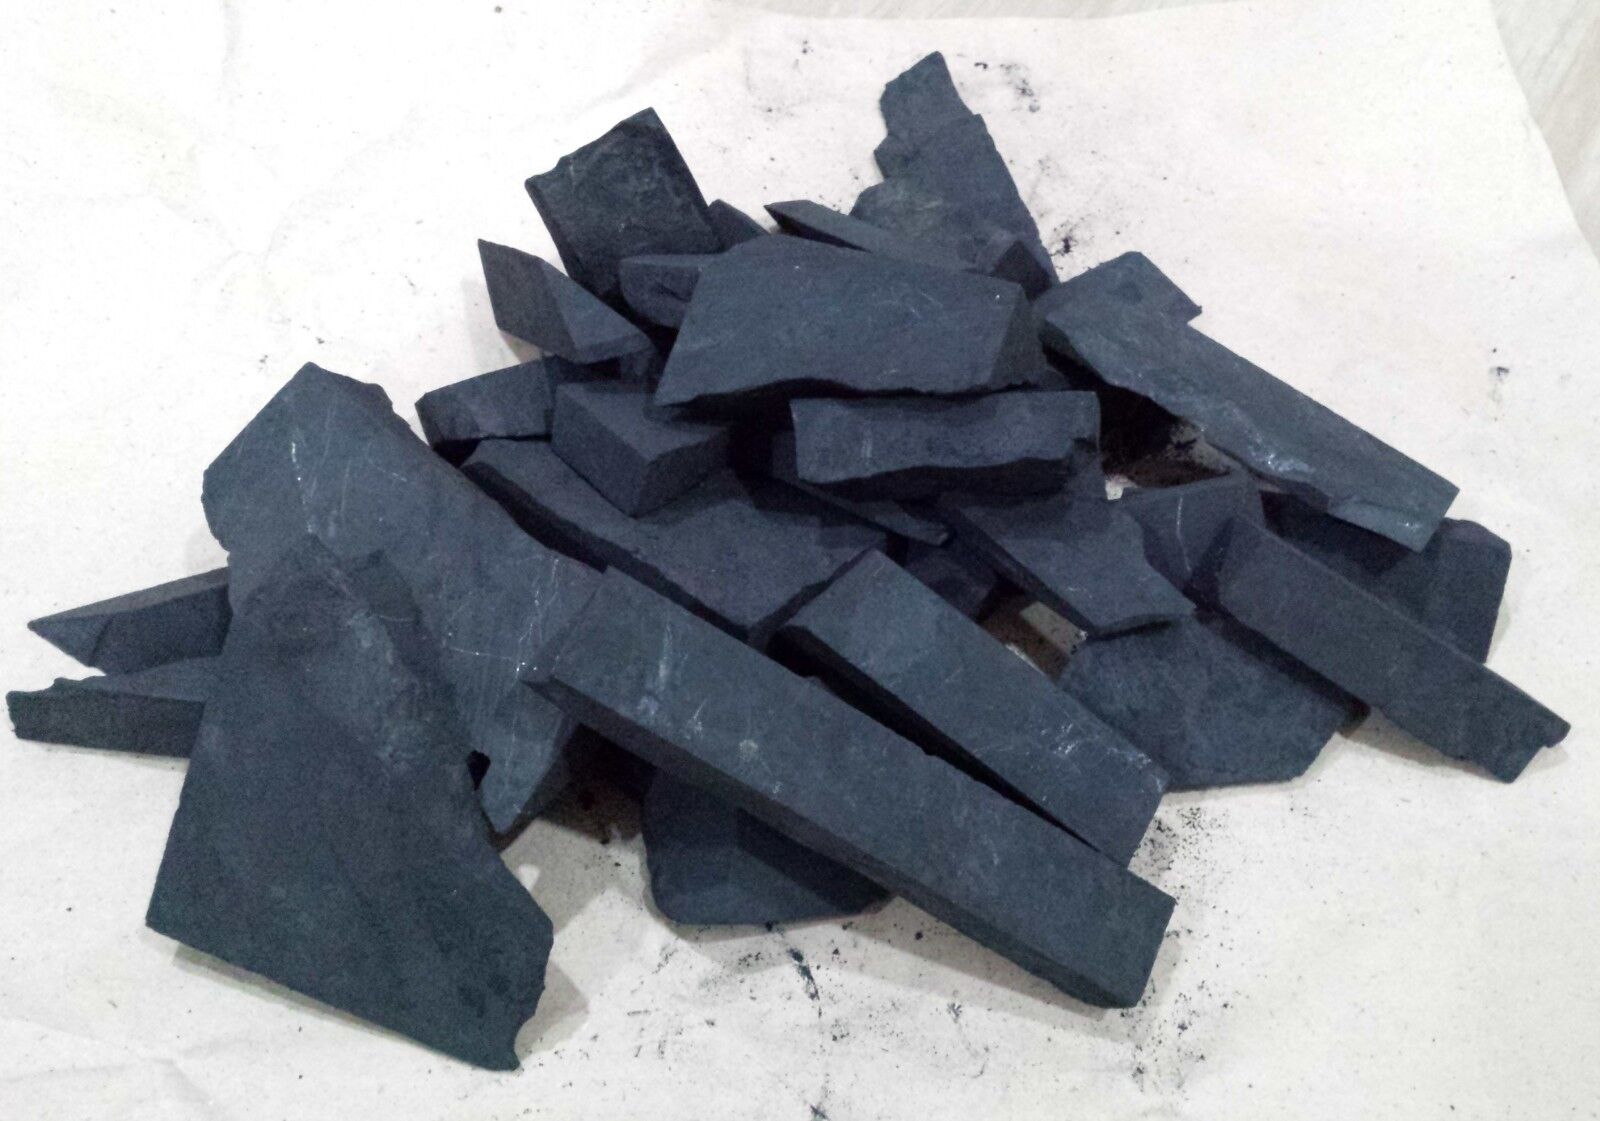 SHUNGITE STONES Large Fraction Big Cut Pieces 5 LB Bag High Quality 100% Real